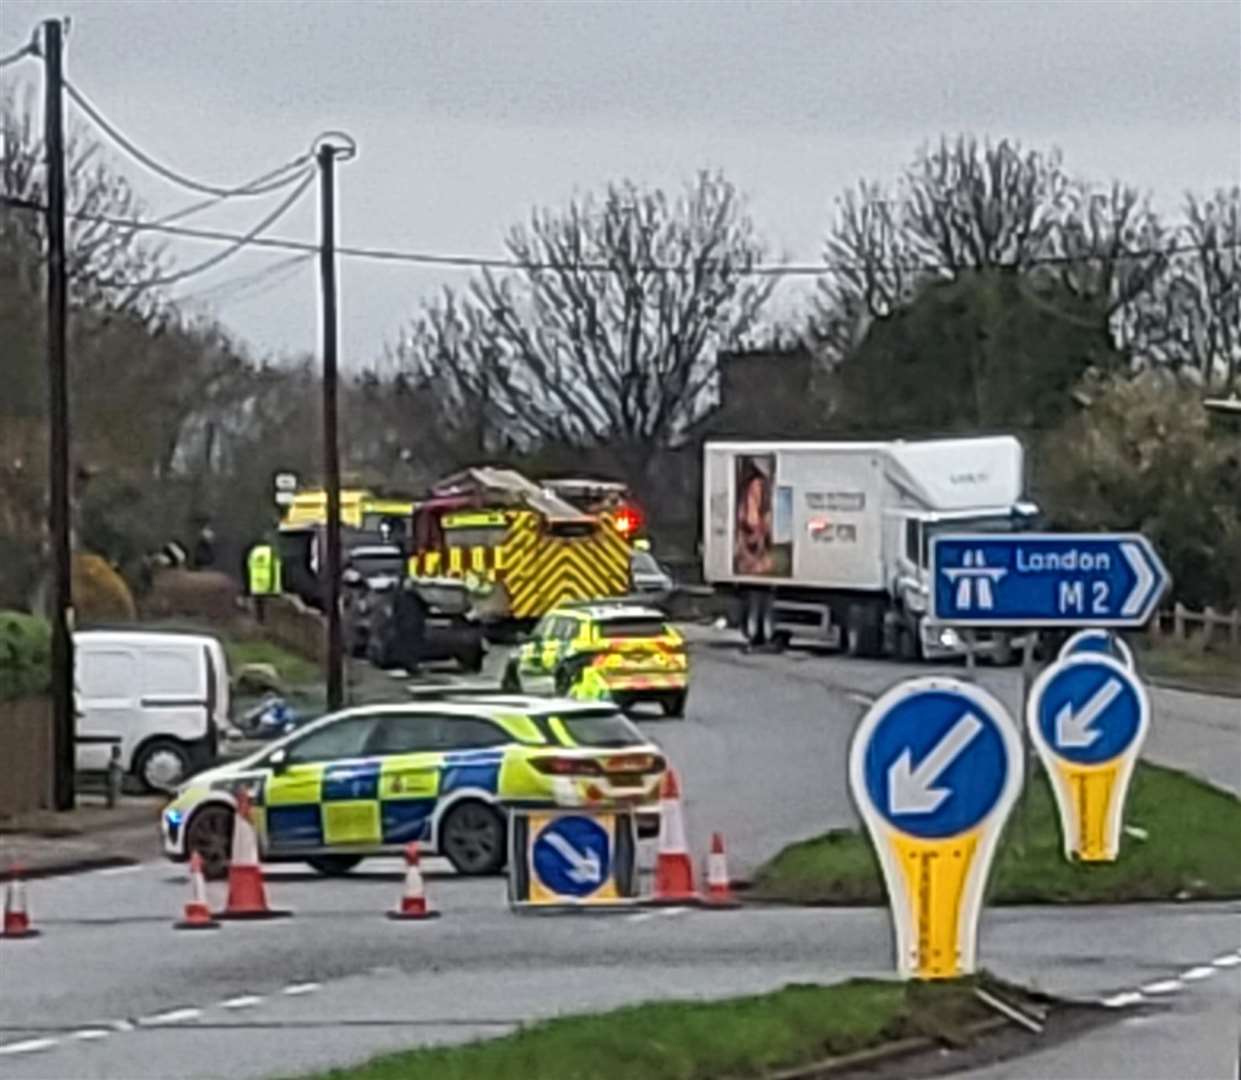 The fatal crash occurred on the A251 Ashford Road in Faversham